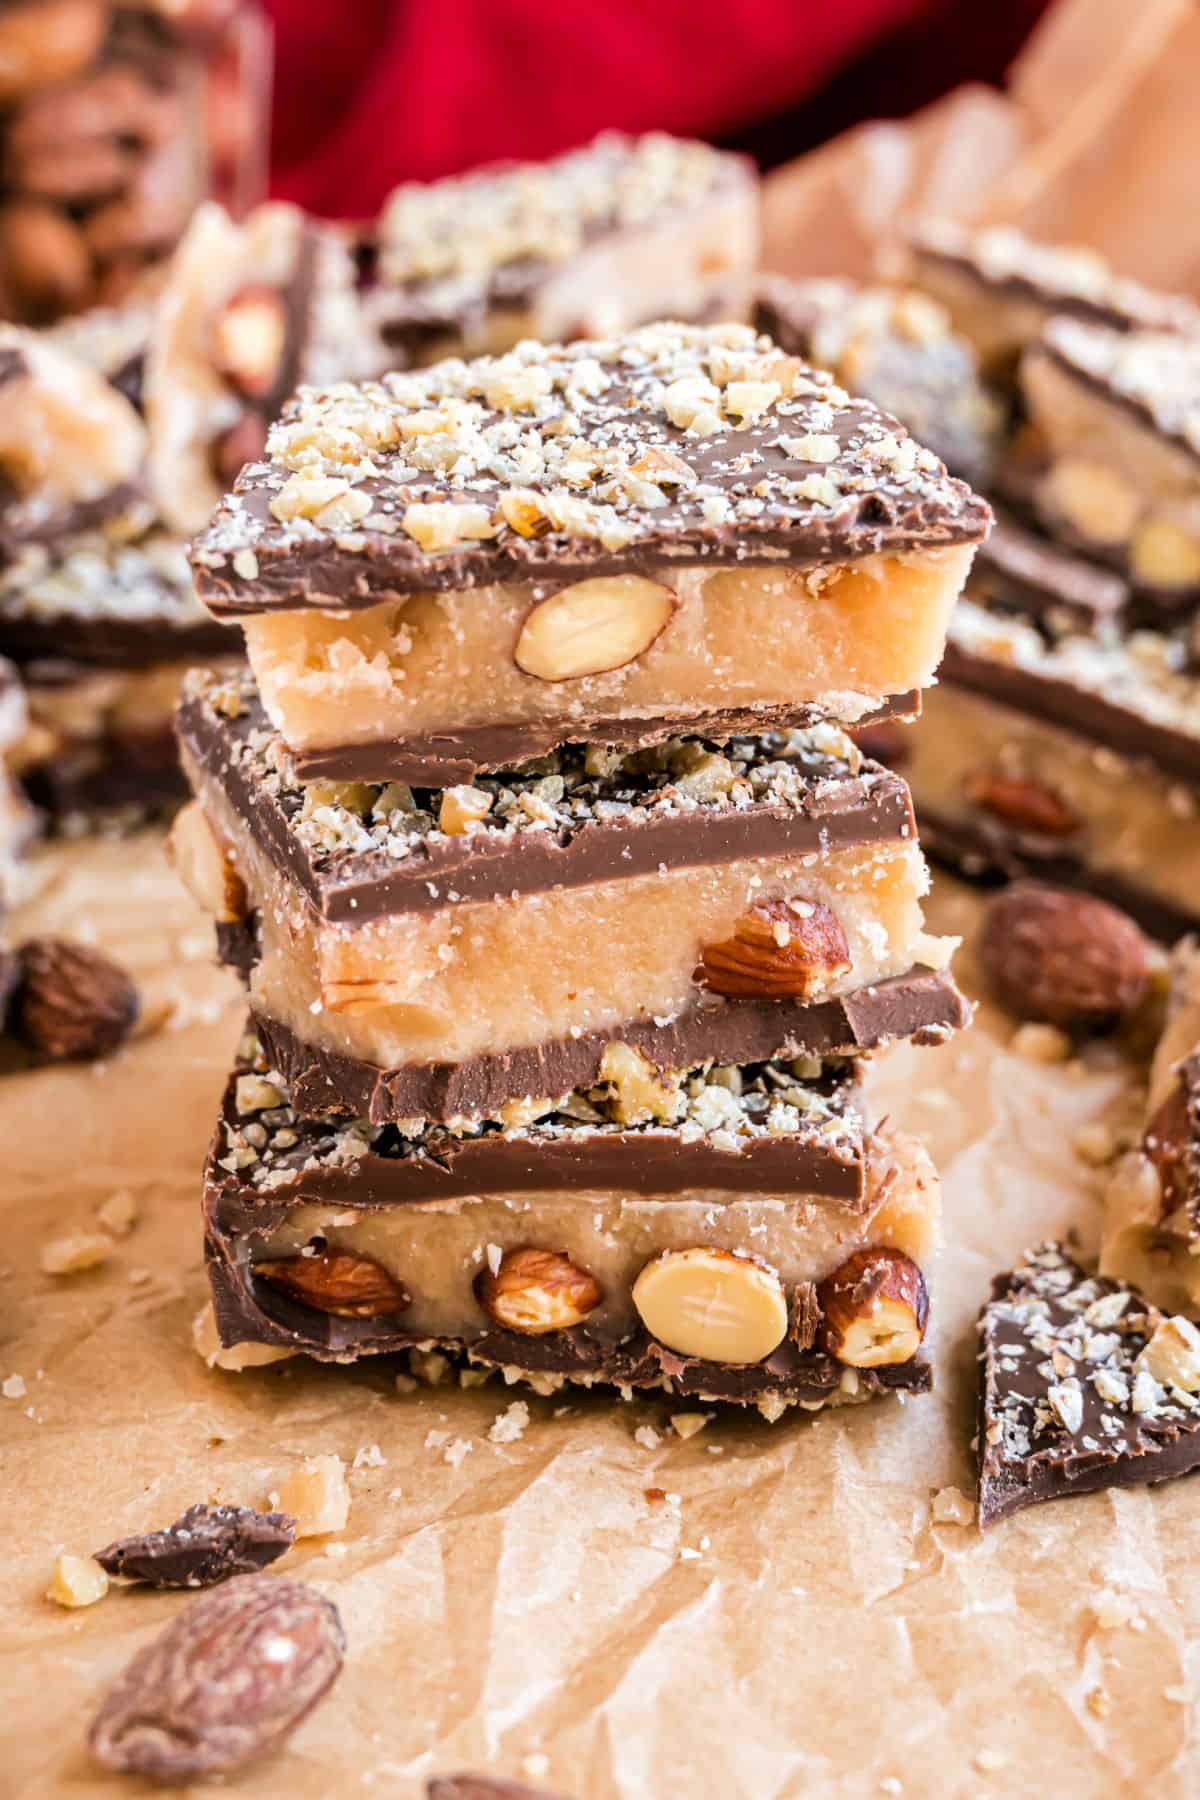 https://www.shugarysweets.com/wp-content/uploads/2018/10/english-toffee-stacked.jpg